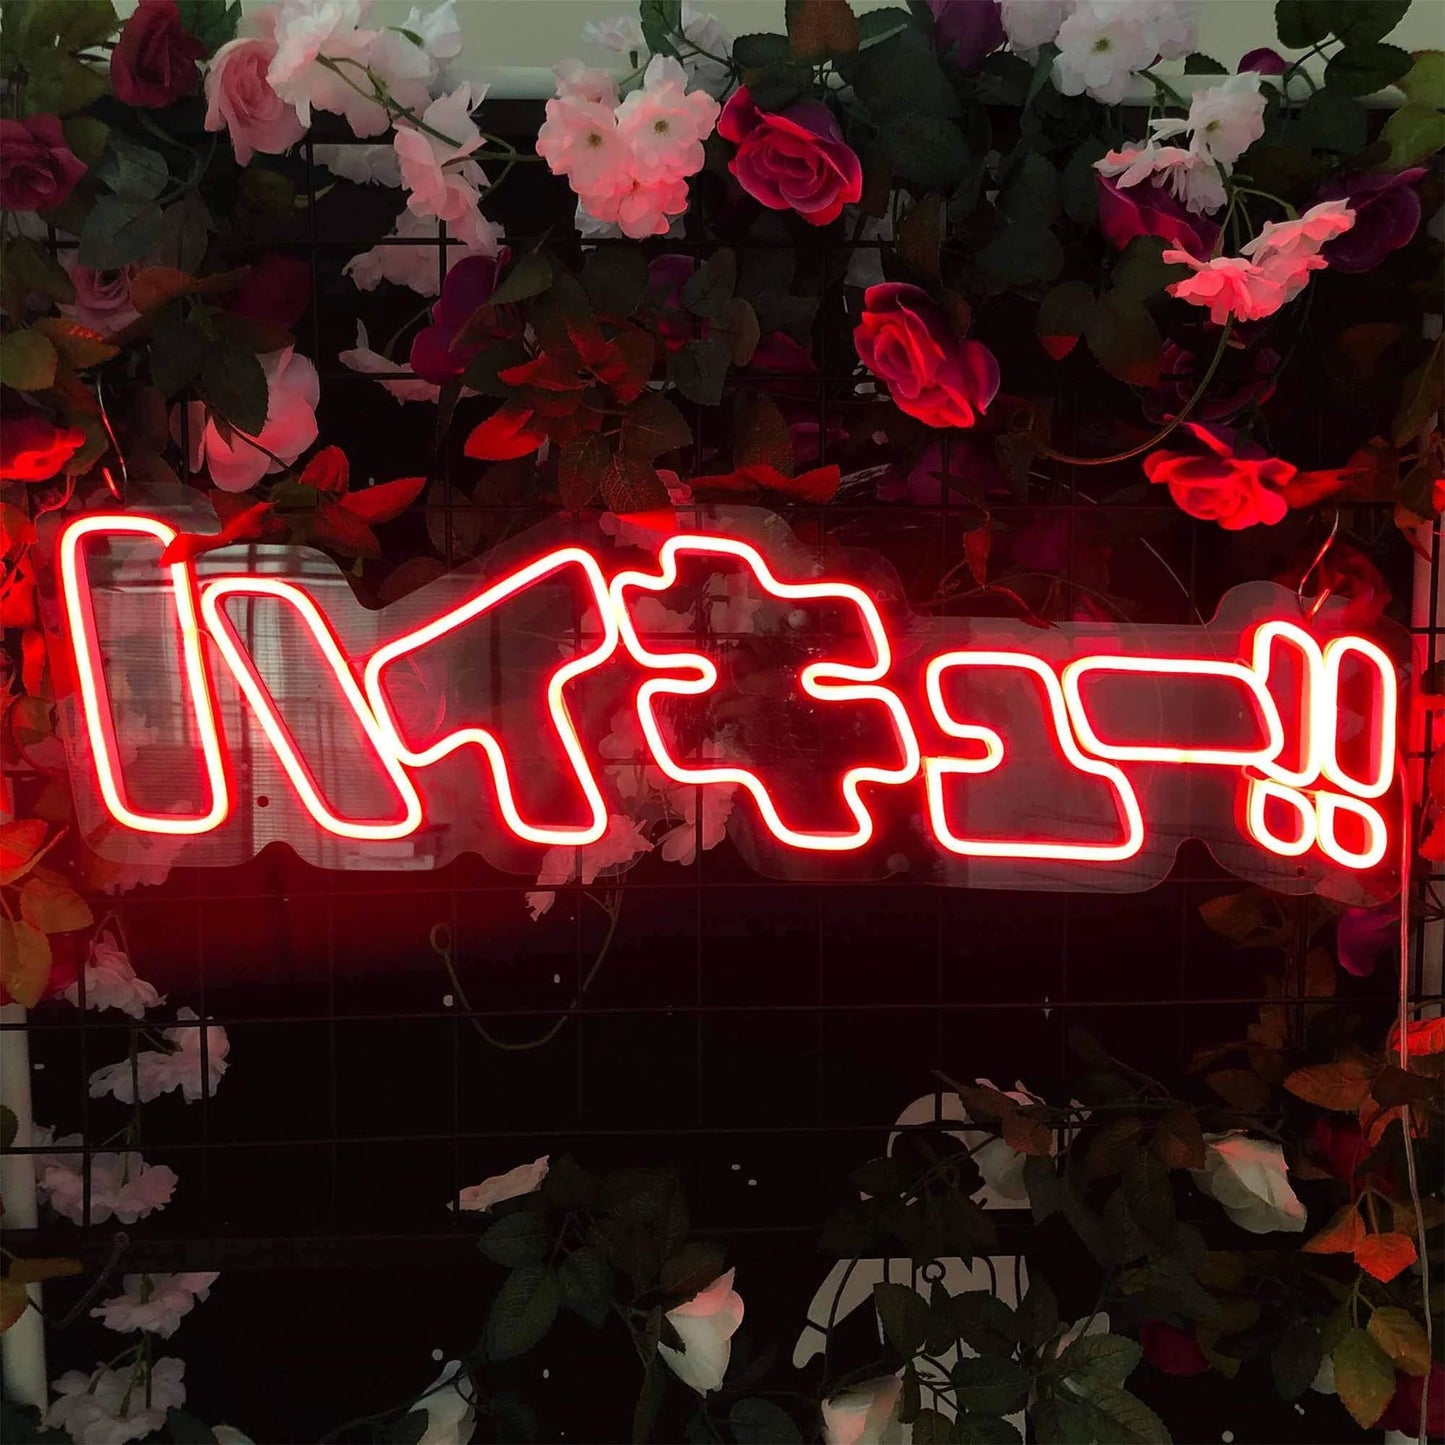 JAPANESE NEON SIGNS